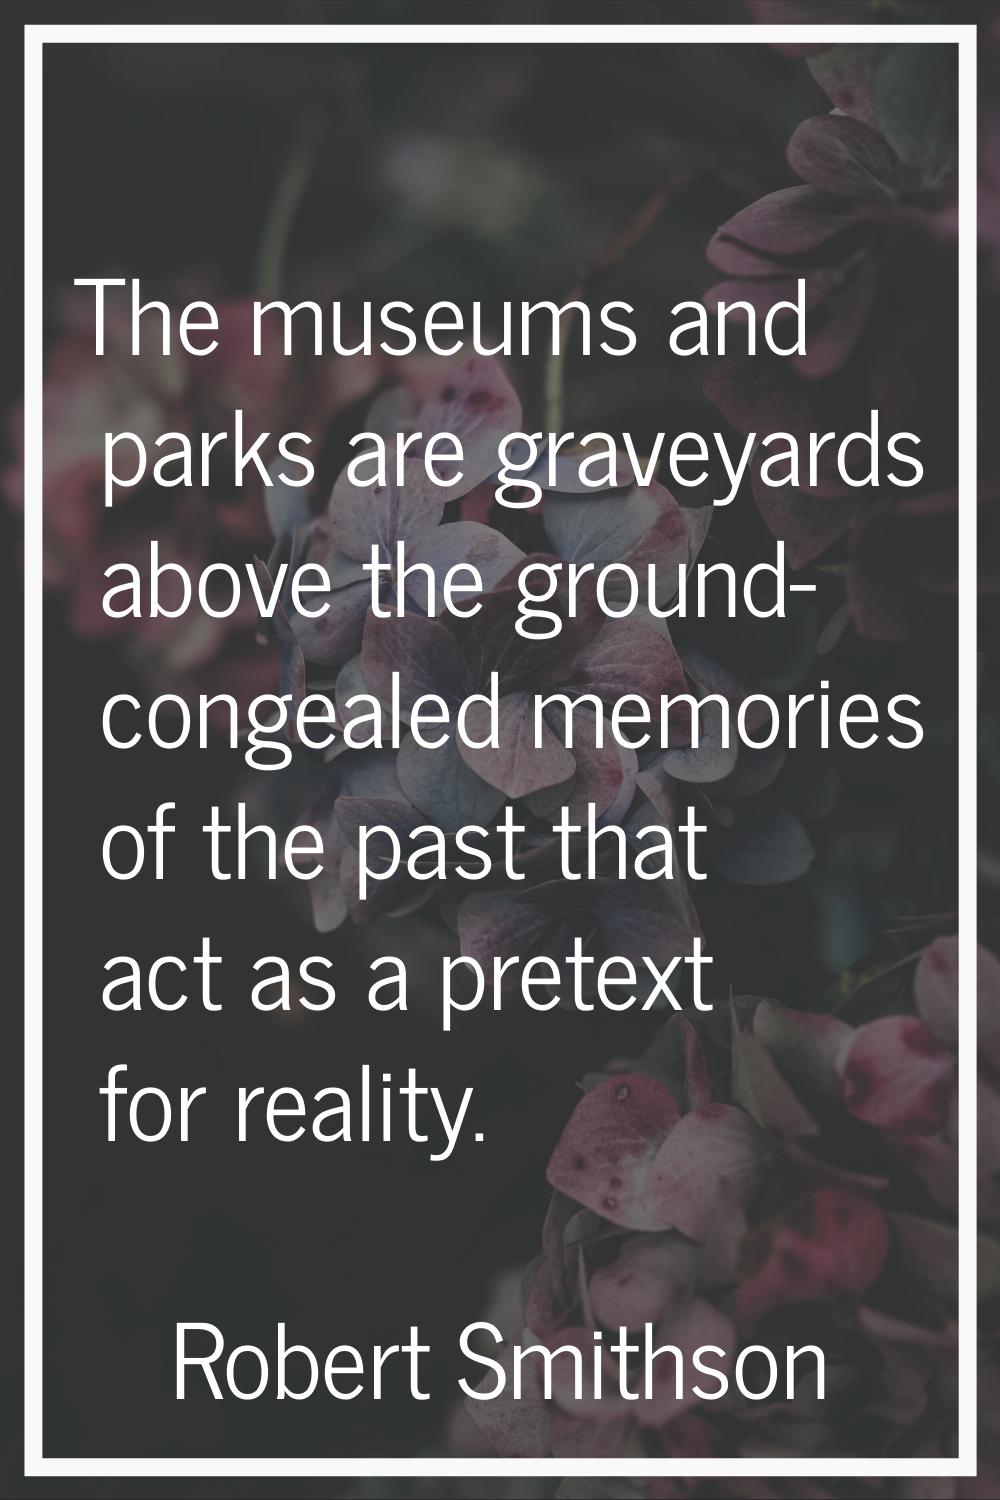 The museums and parks are graveyards above the ground- congealed memories of the past that act as a